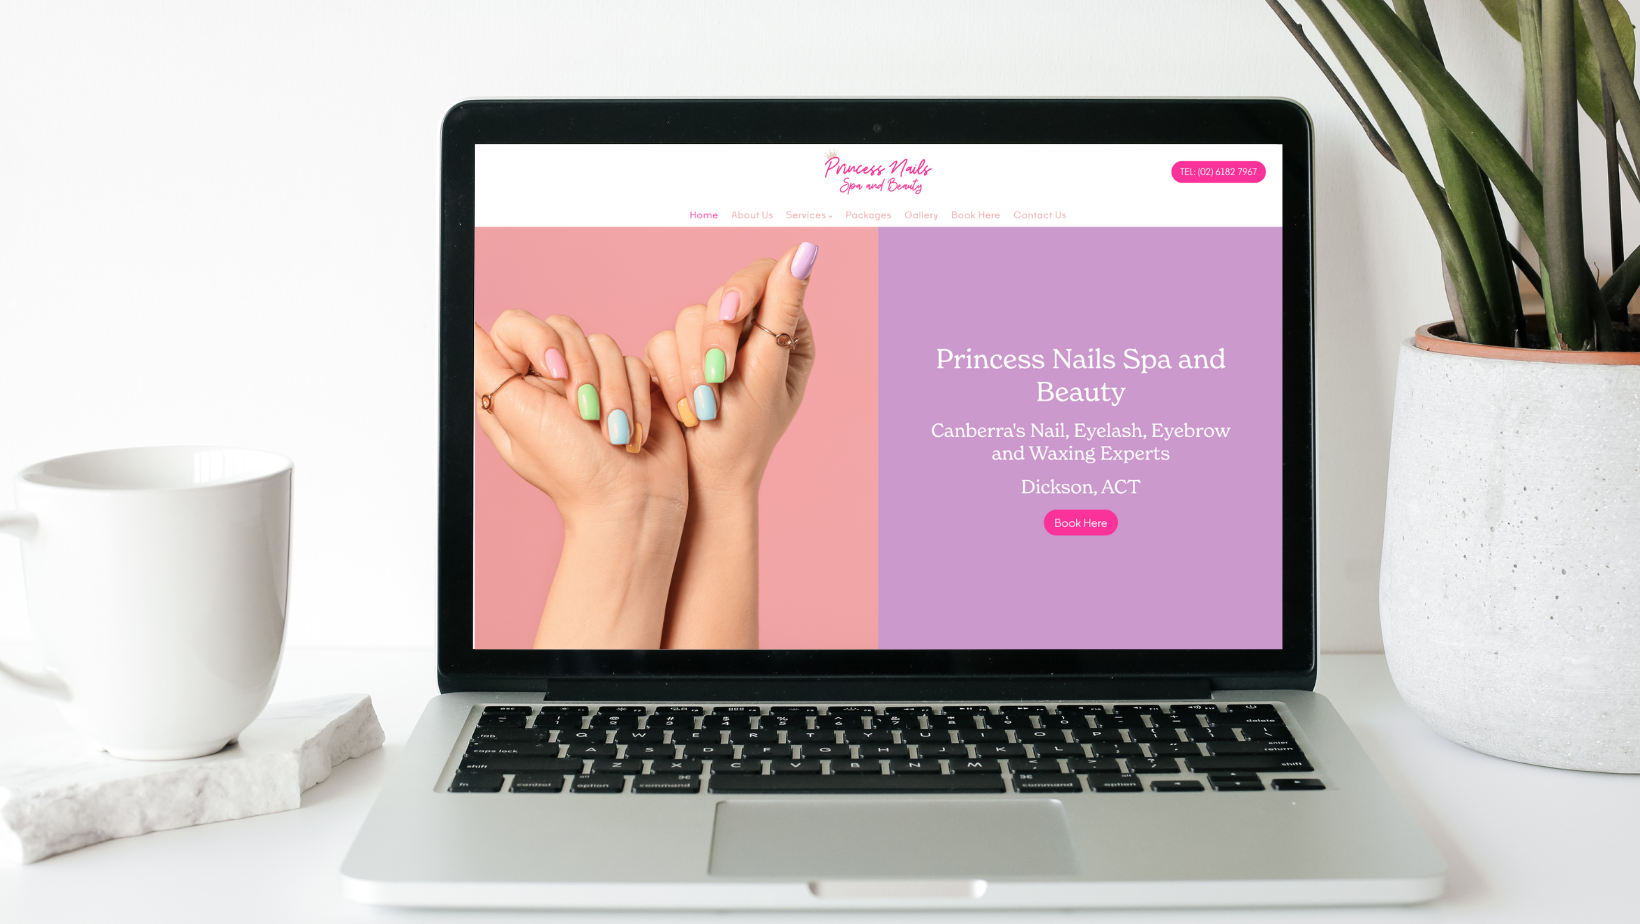 Laptop showing homepage of Princess Nails Spa and Beauty